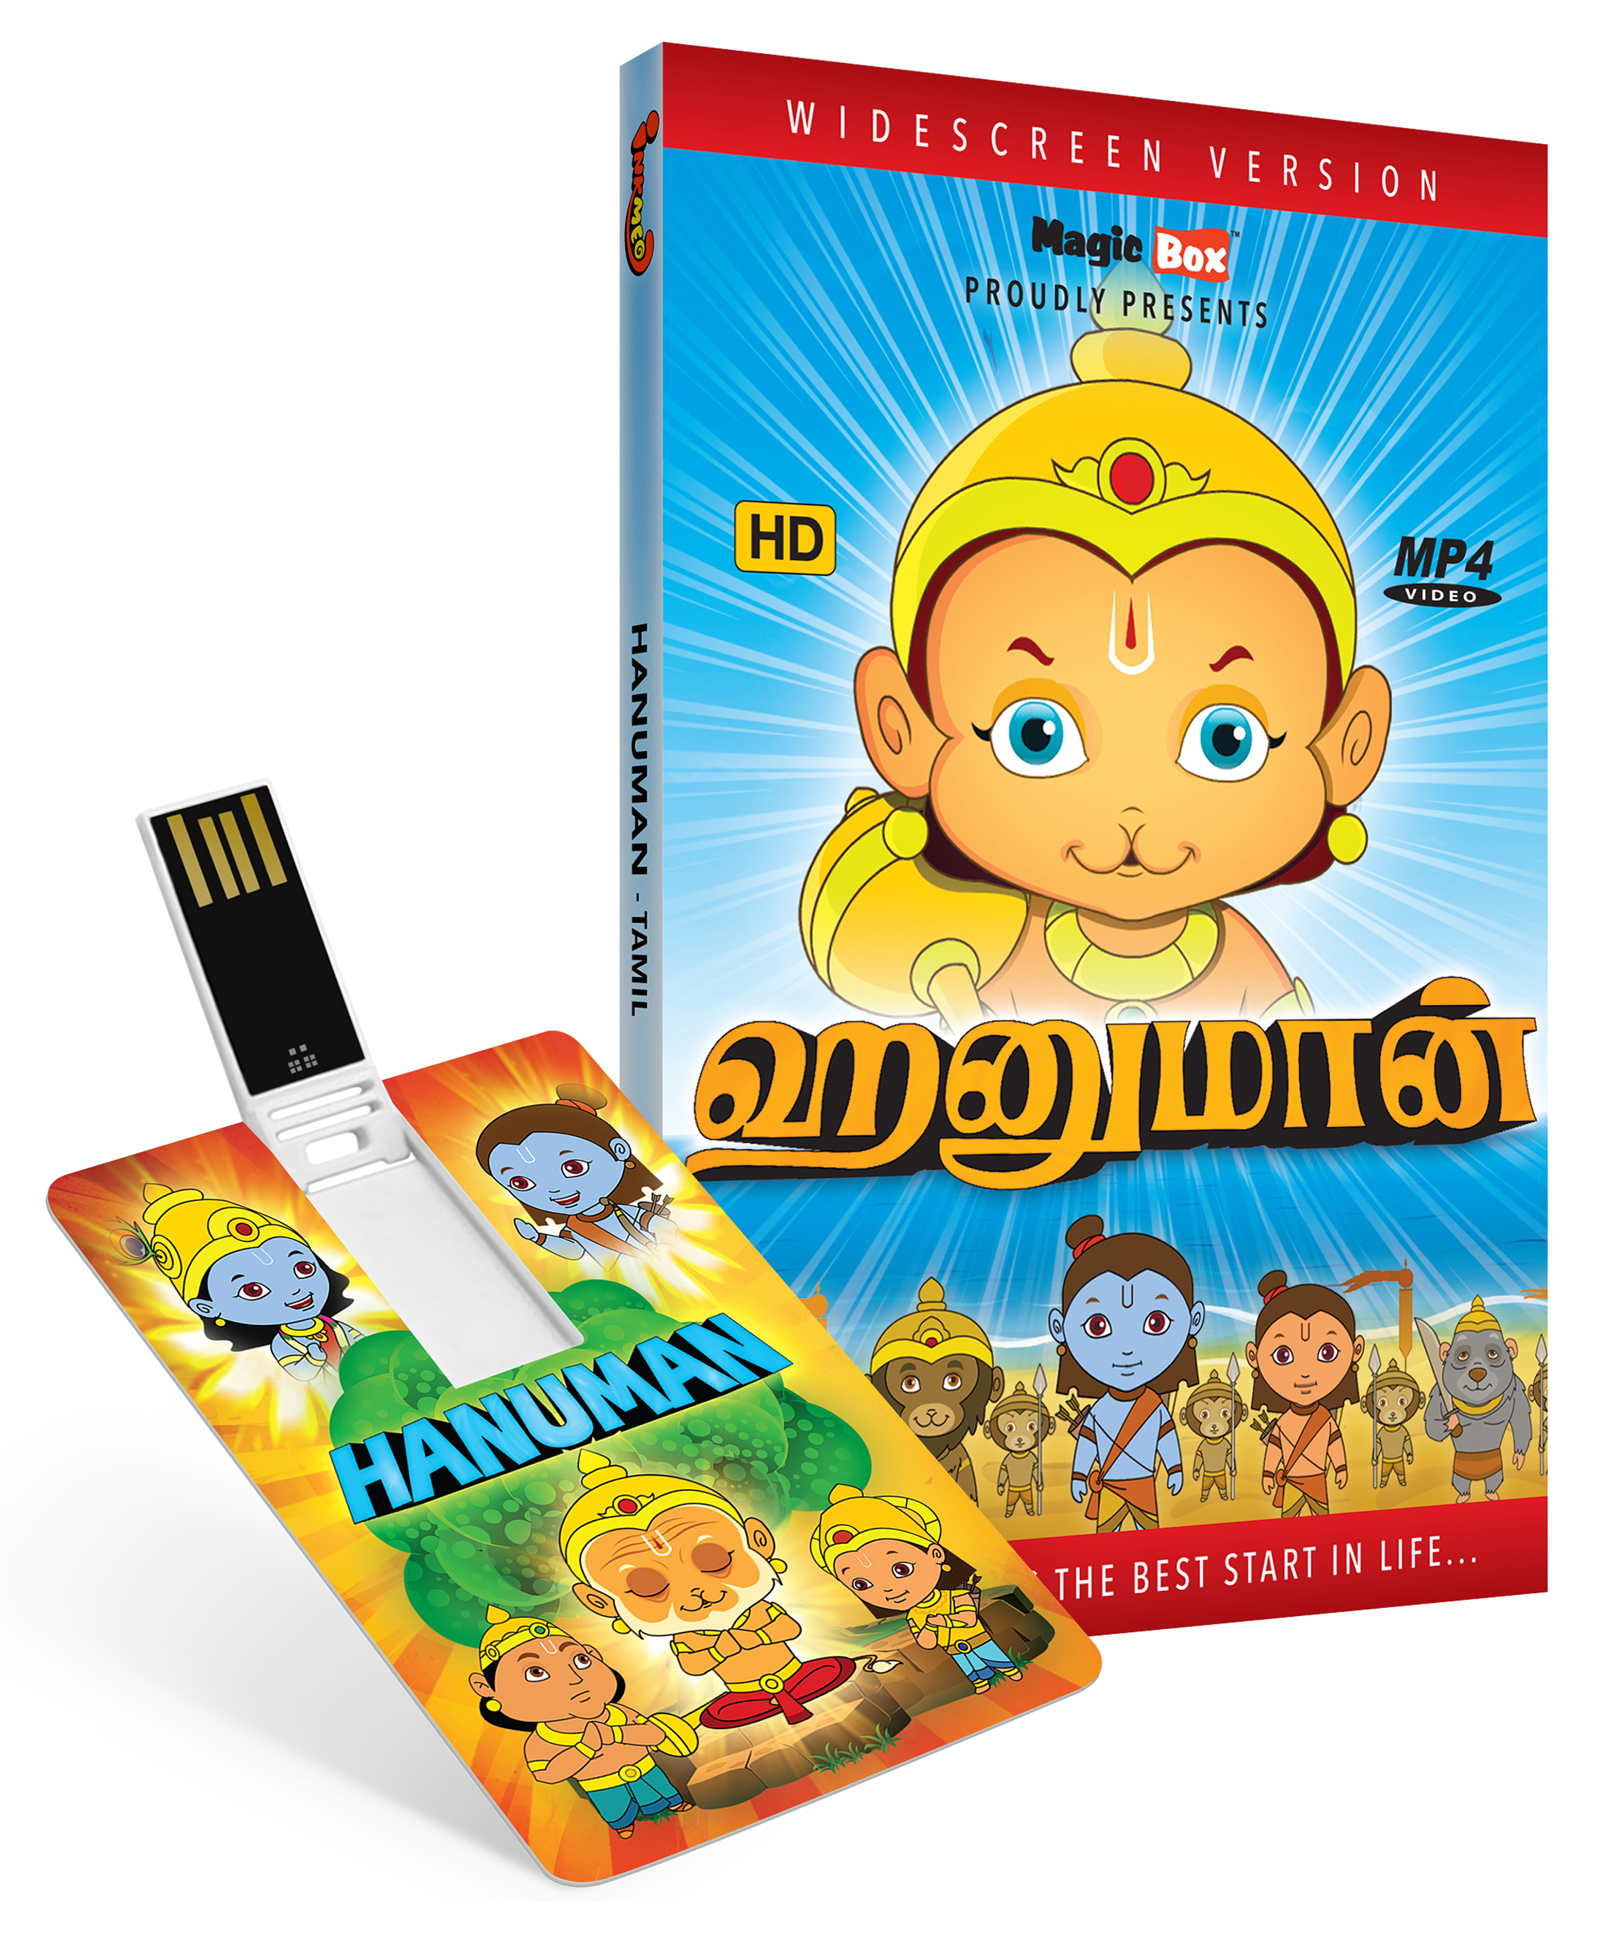 Inkmeo Hanuman USB Pendrive Animated Movie - Tamil Online in India, Buy at  Best Price from  - 8476769